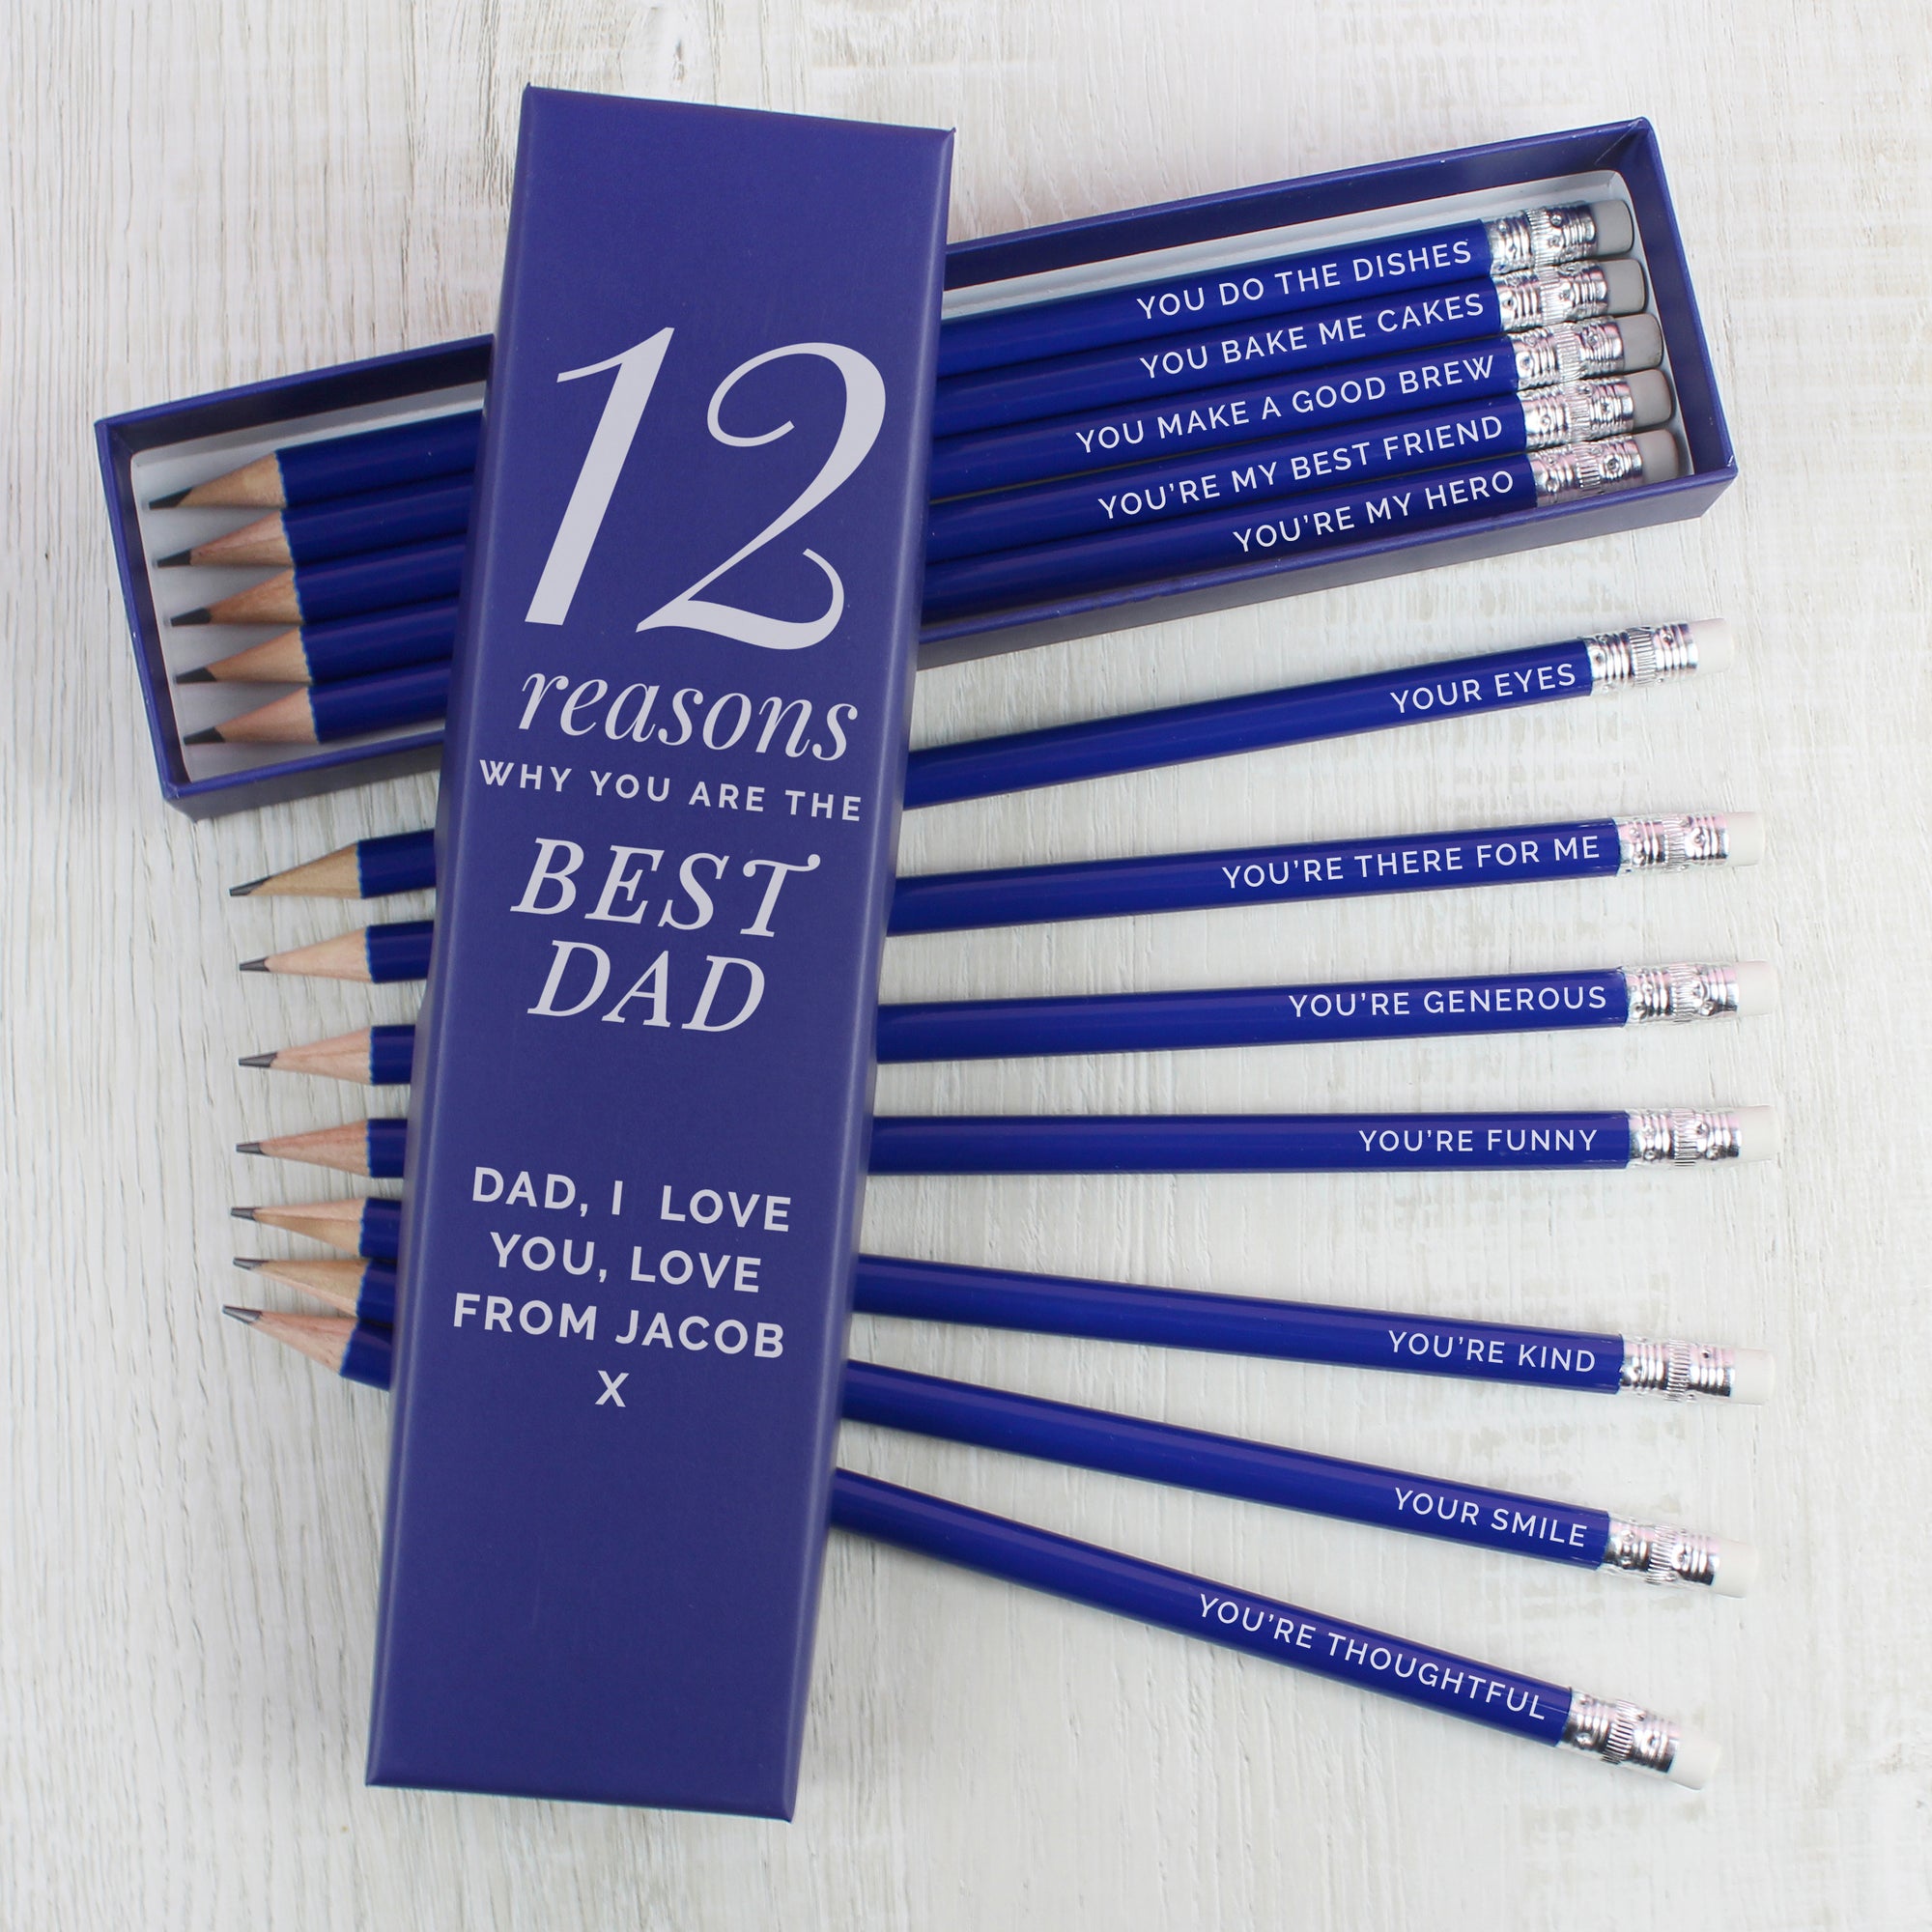 Box of 12 personalised pencils in a blue box. The box has fixed text printed in white which reads '12 reasons' which can be followed by a name and message of your choice which will also be printed in white below that. Inside the box are 12 HB writing pencils with a blue outer and an eraser on the top. Each pencil can be individually personalised with your own reasons why you love someone or other text of your choice.